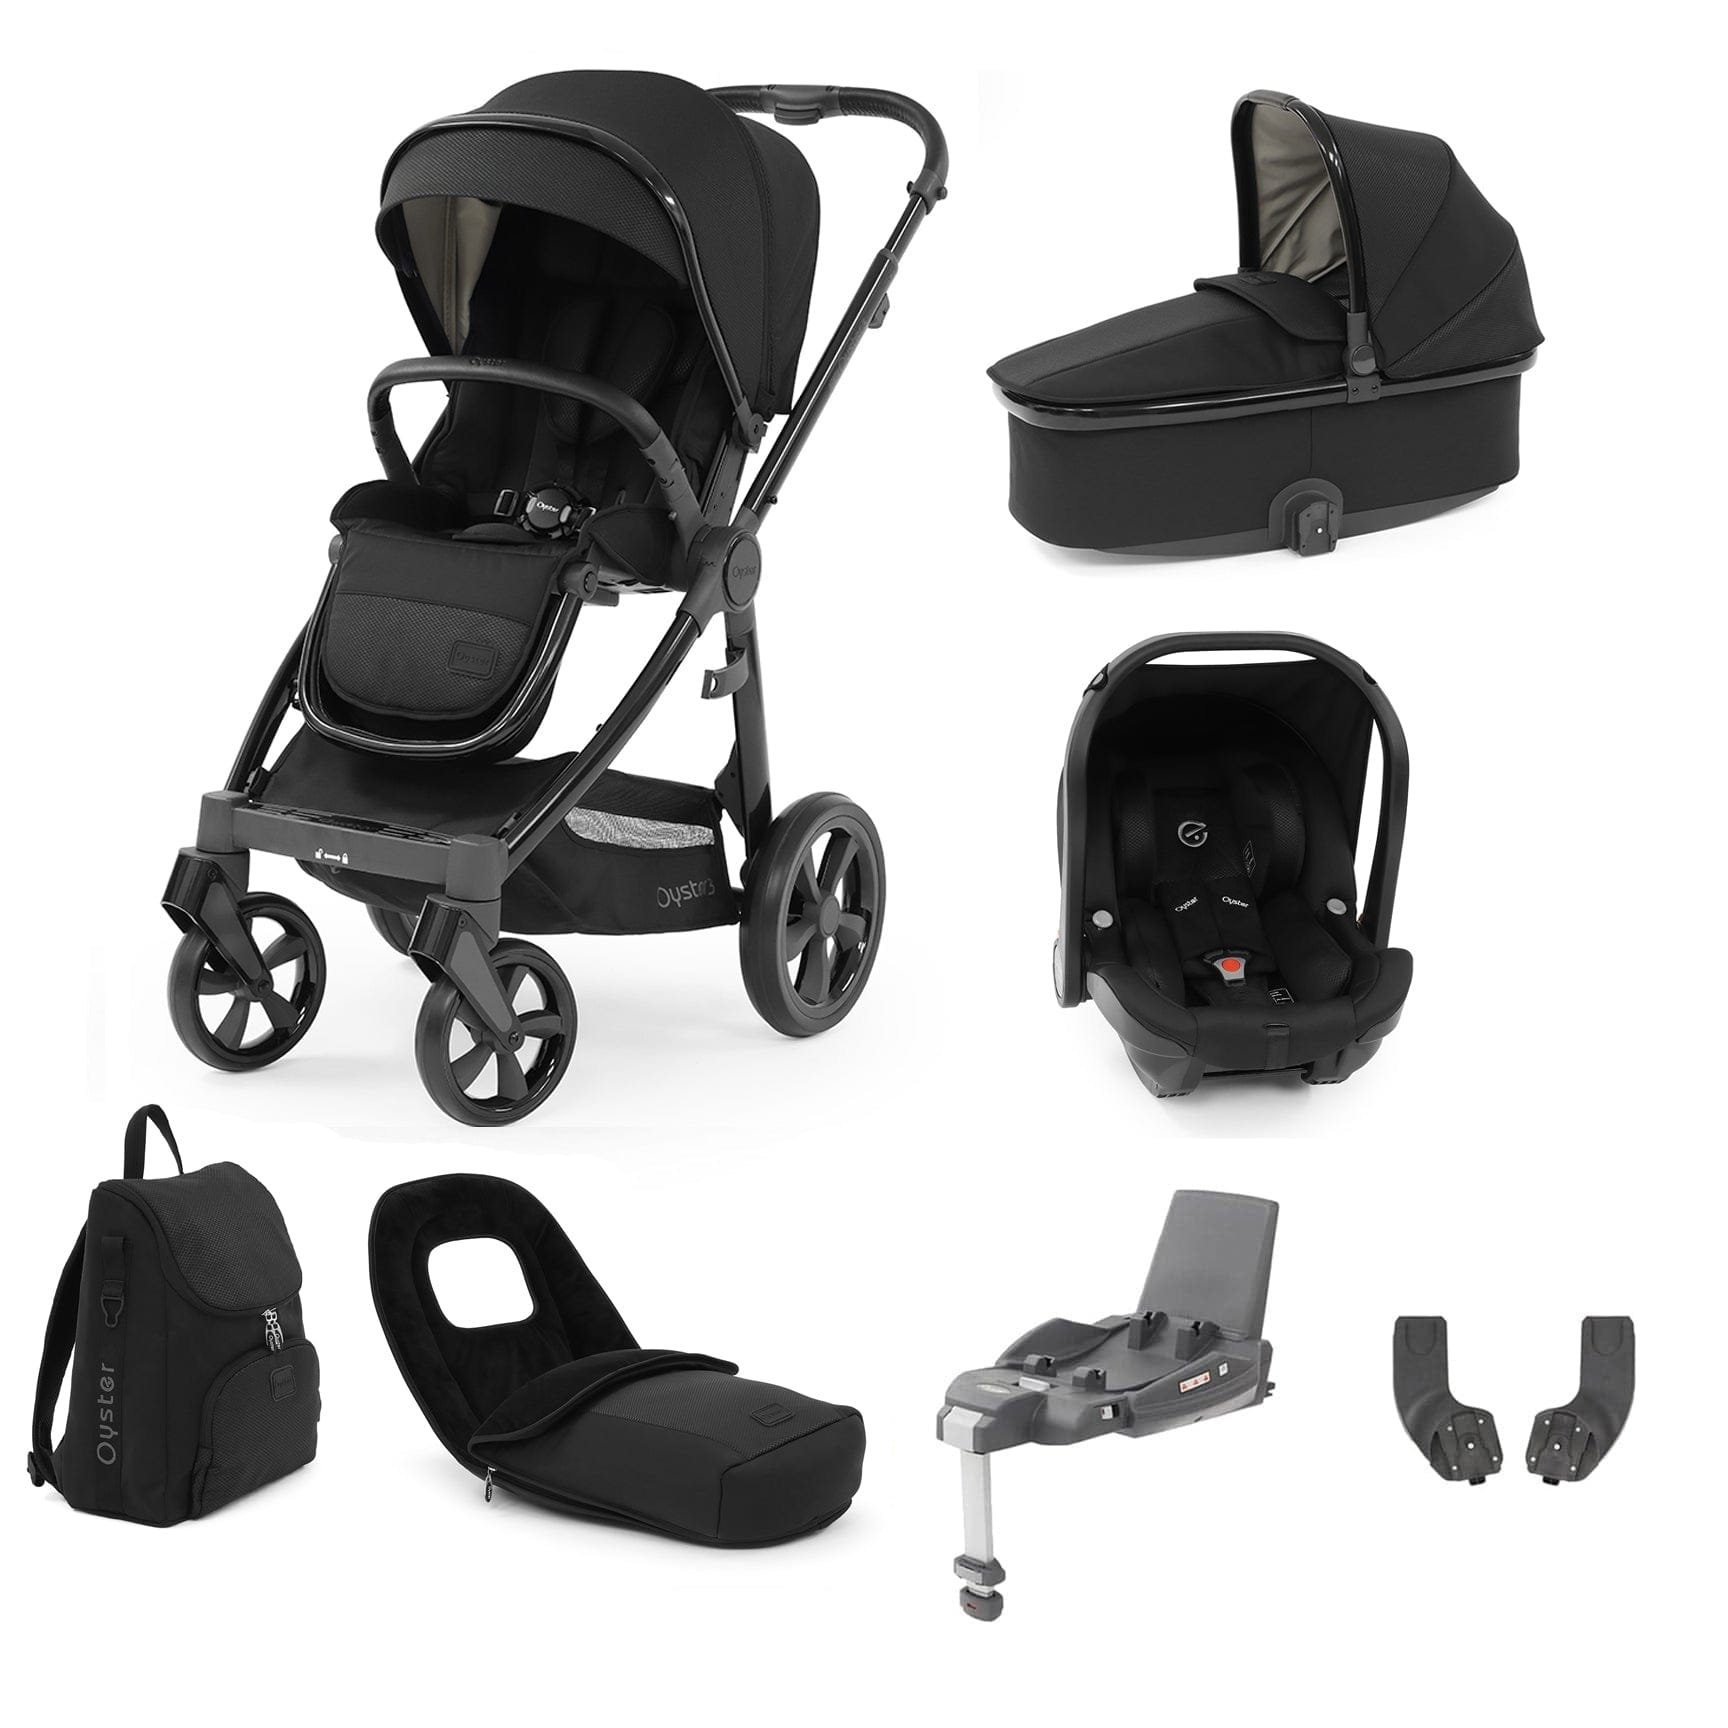 BabyStyle travel systems Babystyle Oyster 3 Luxury 7 Piece with Car Seat Bundle in Pixel 14775-PXL